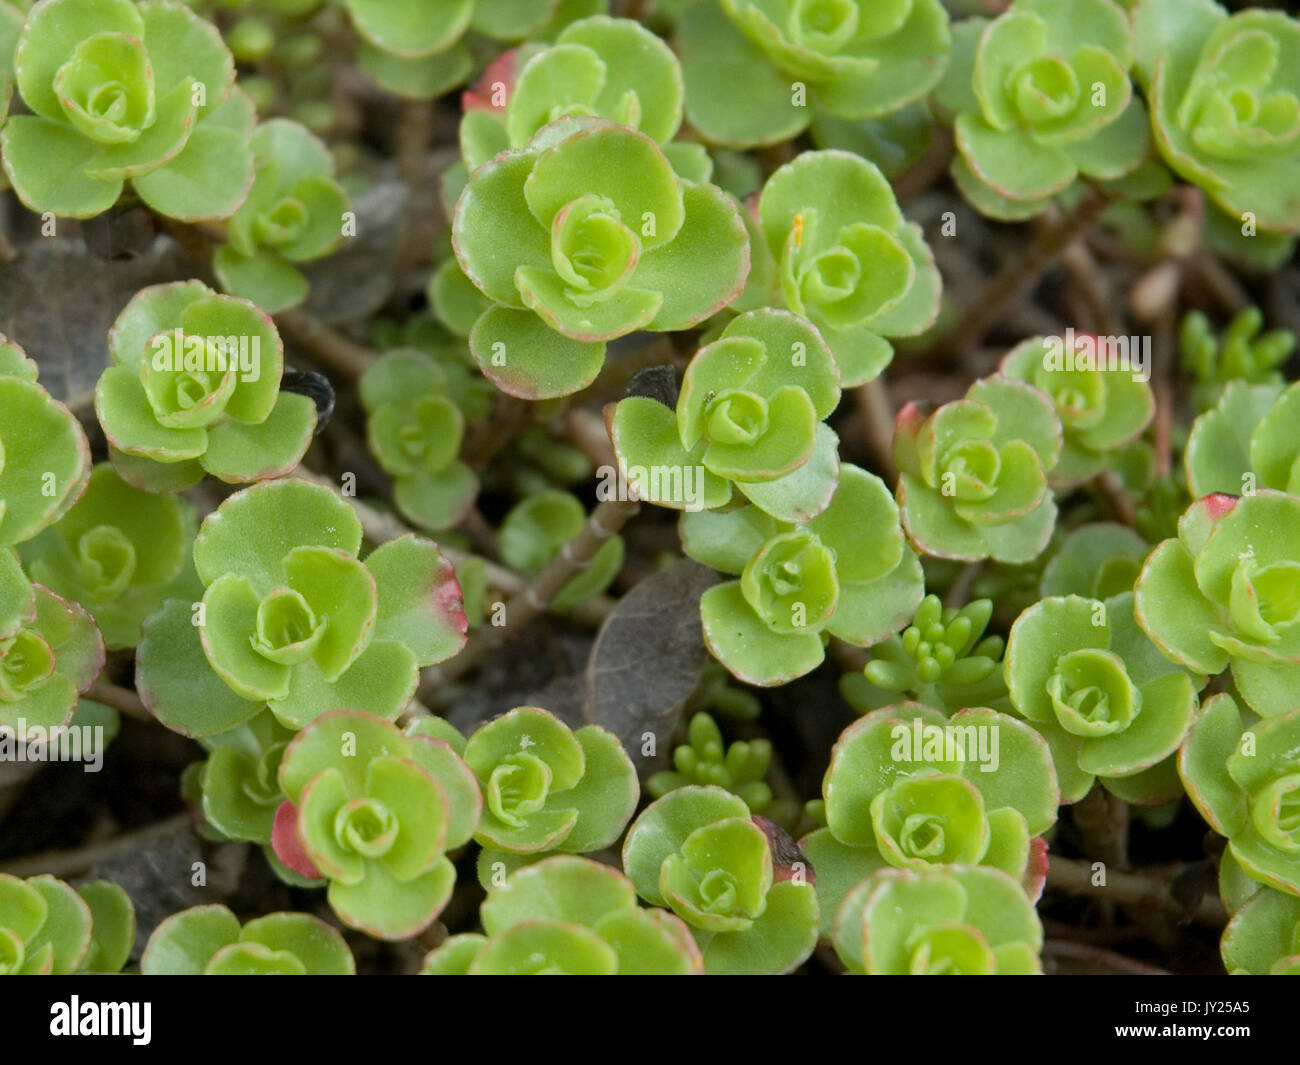 stonecrops as ground cover plants Stock Photo